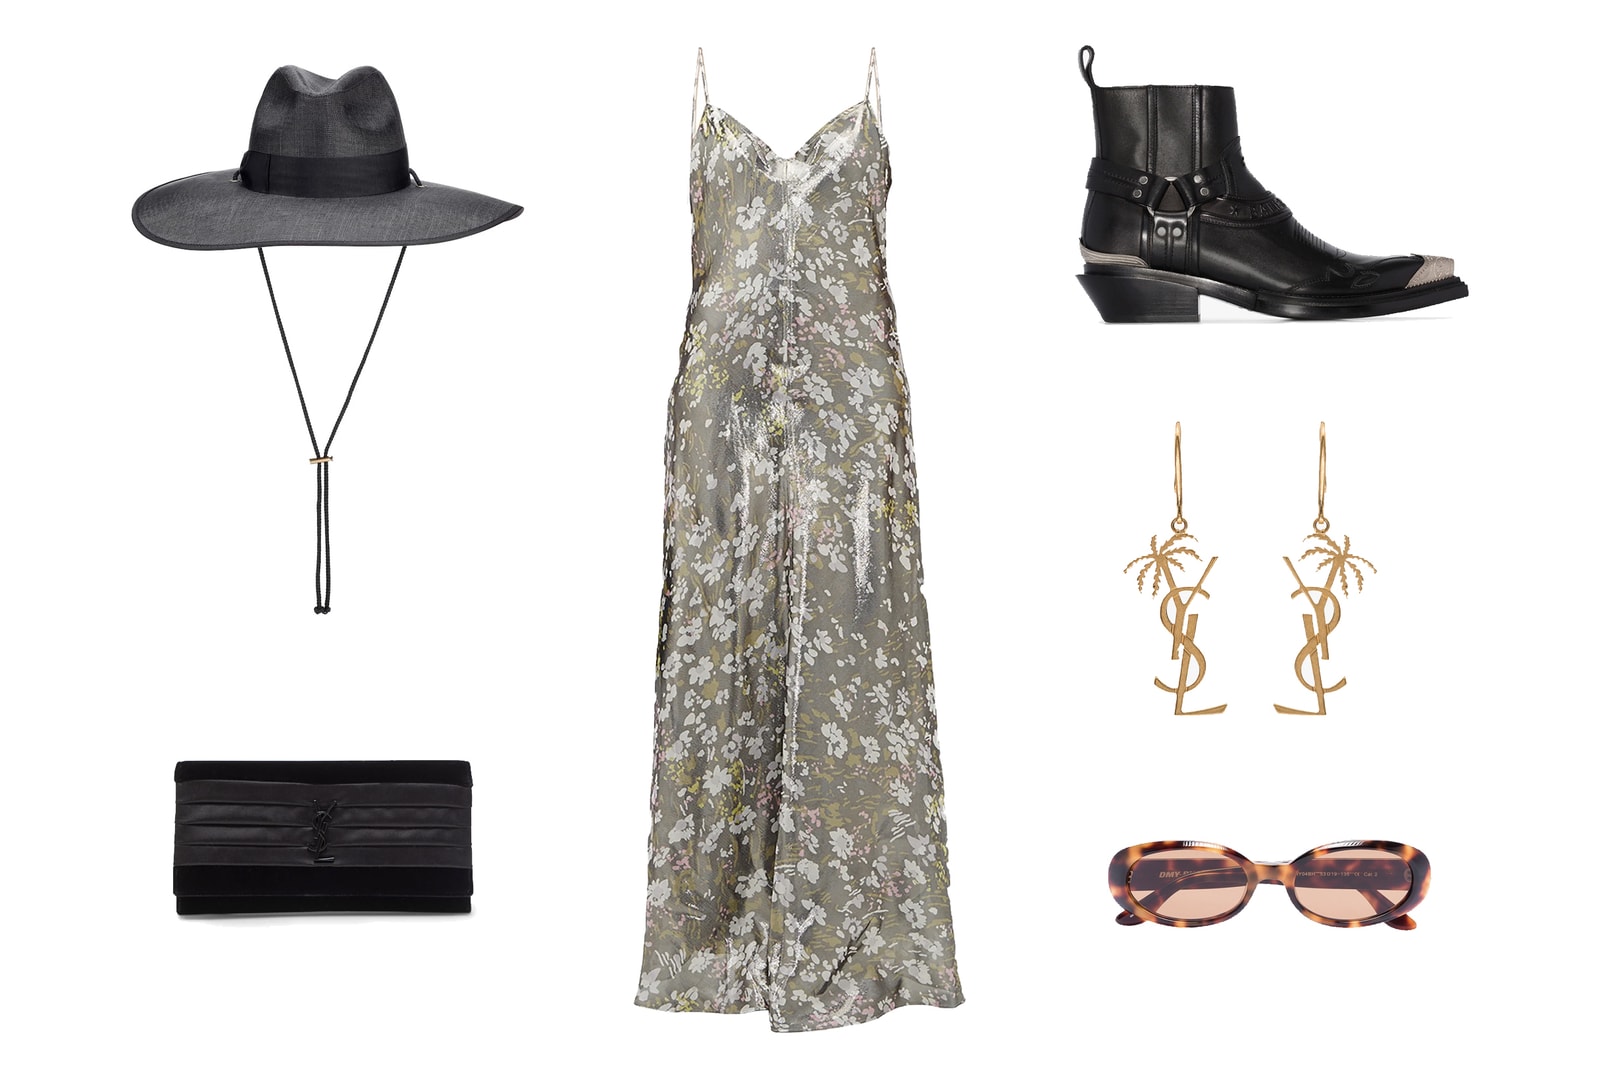 How To Wear The Cowboy Hat Fashion Trend Style Gucci Saint Laurent Acne Studios Outfit Inspiration Nike Marine Serre